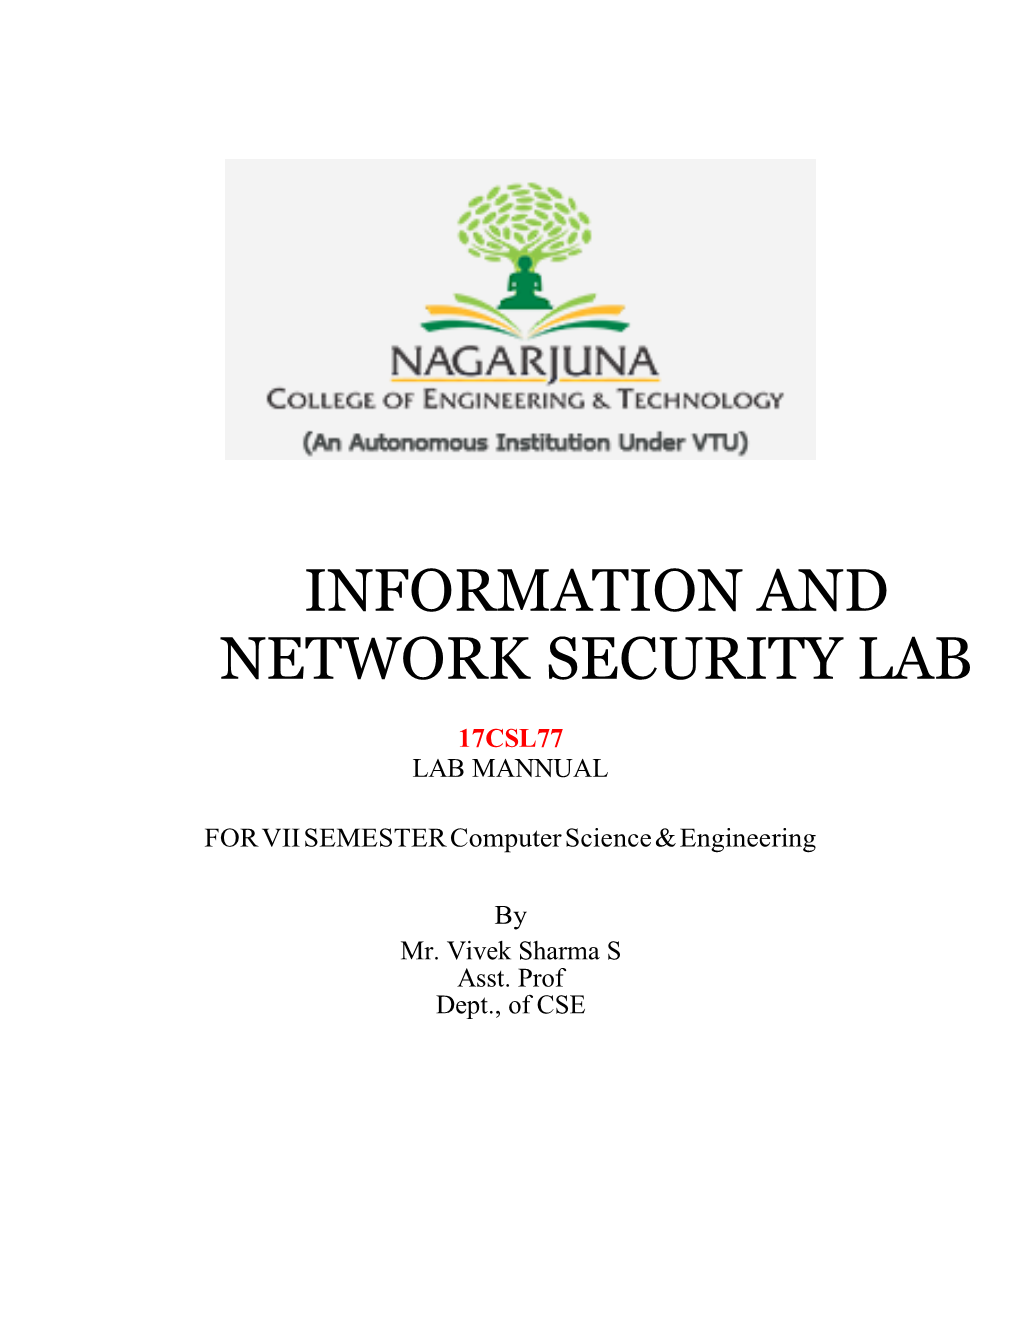 Information and Network Security Lab